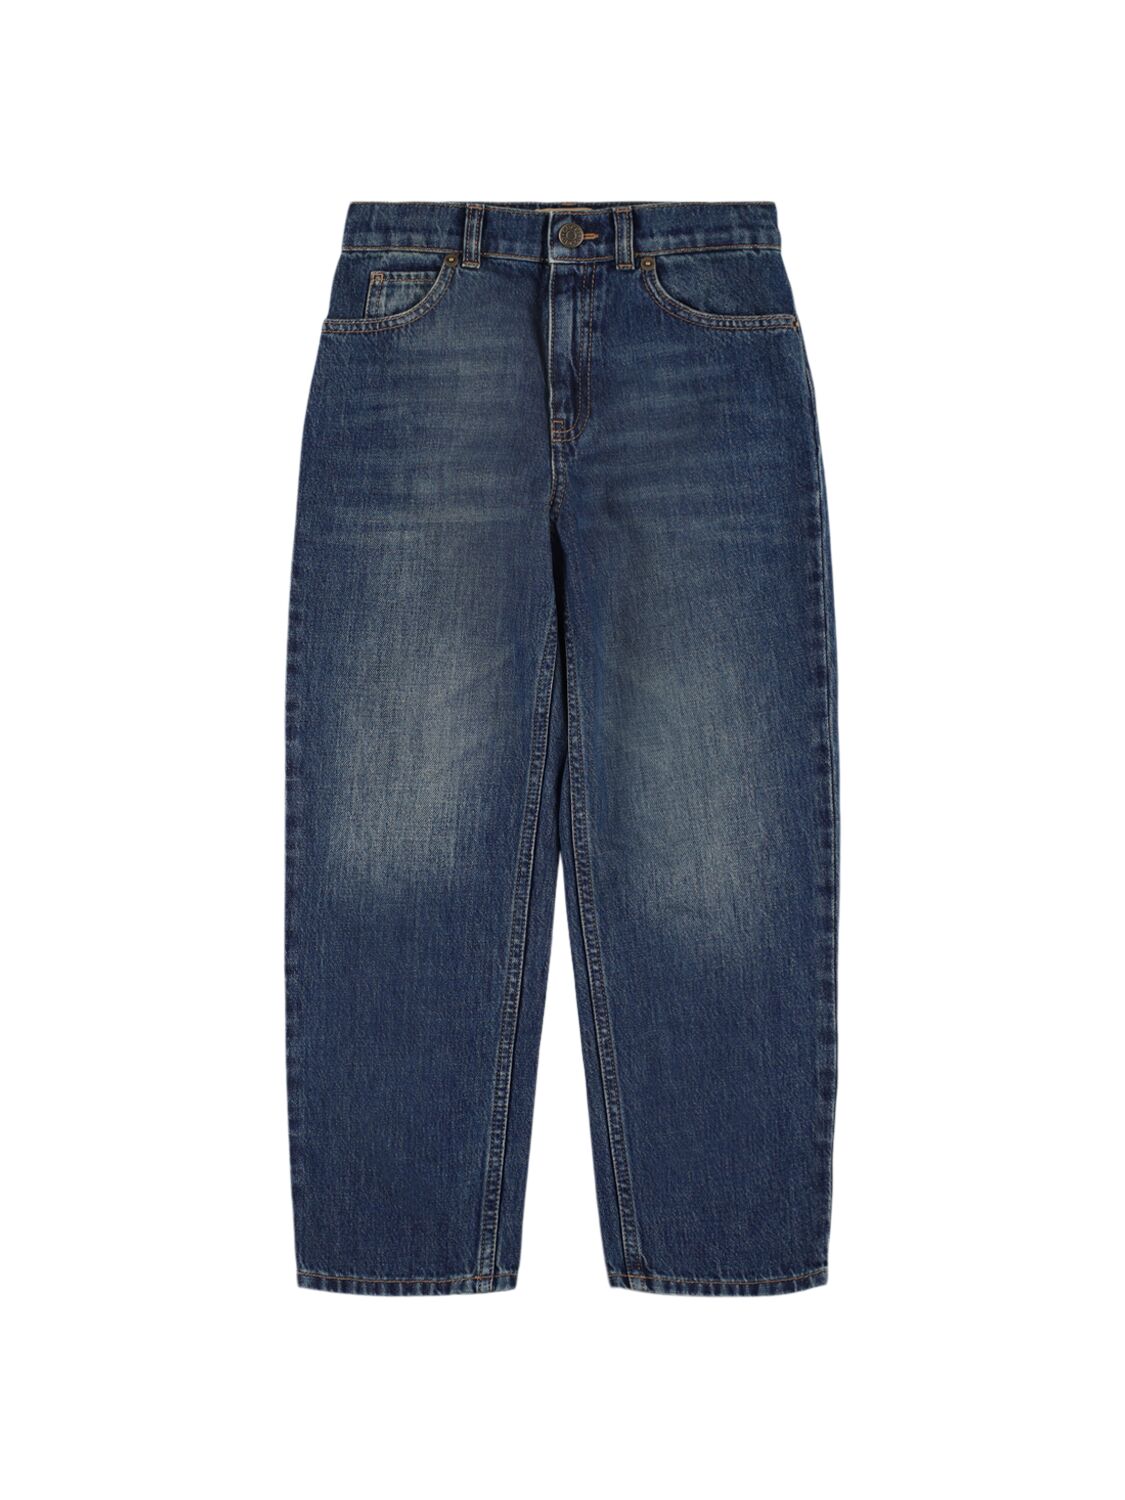 Gucci Washed Cotton Denim Jeans In Blue